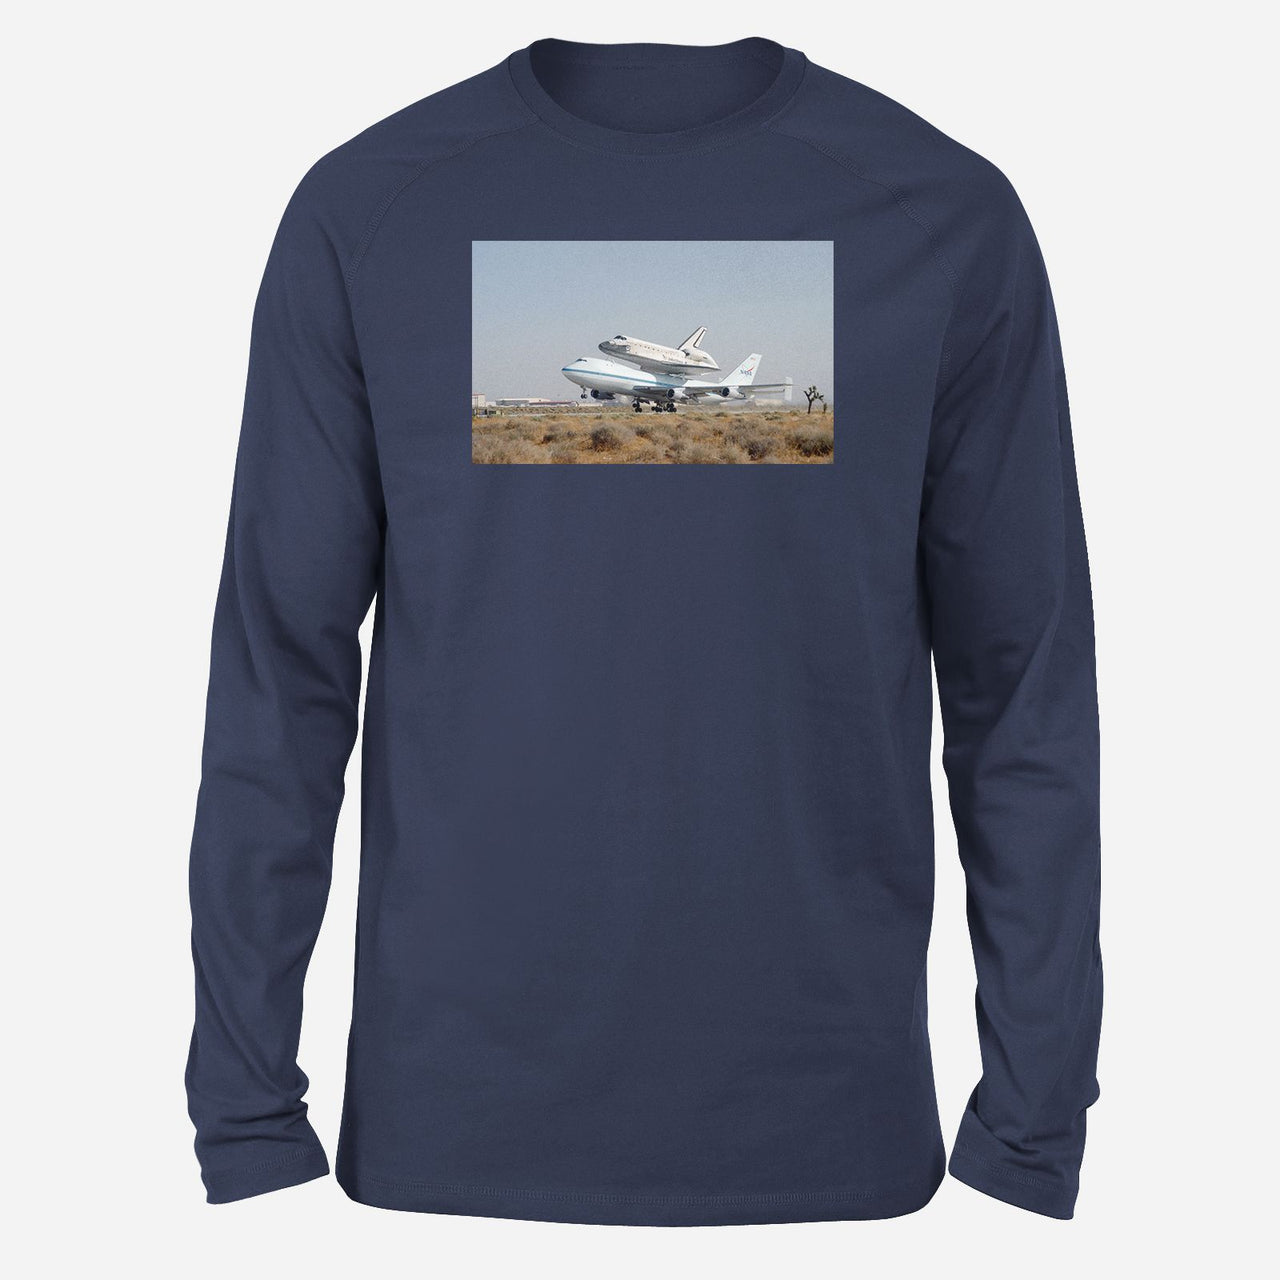 Boeing 747 Carrying Nasa's Space Shuttle Designed Long-Sleeve T-Shirts